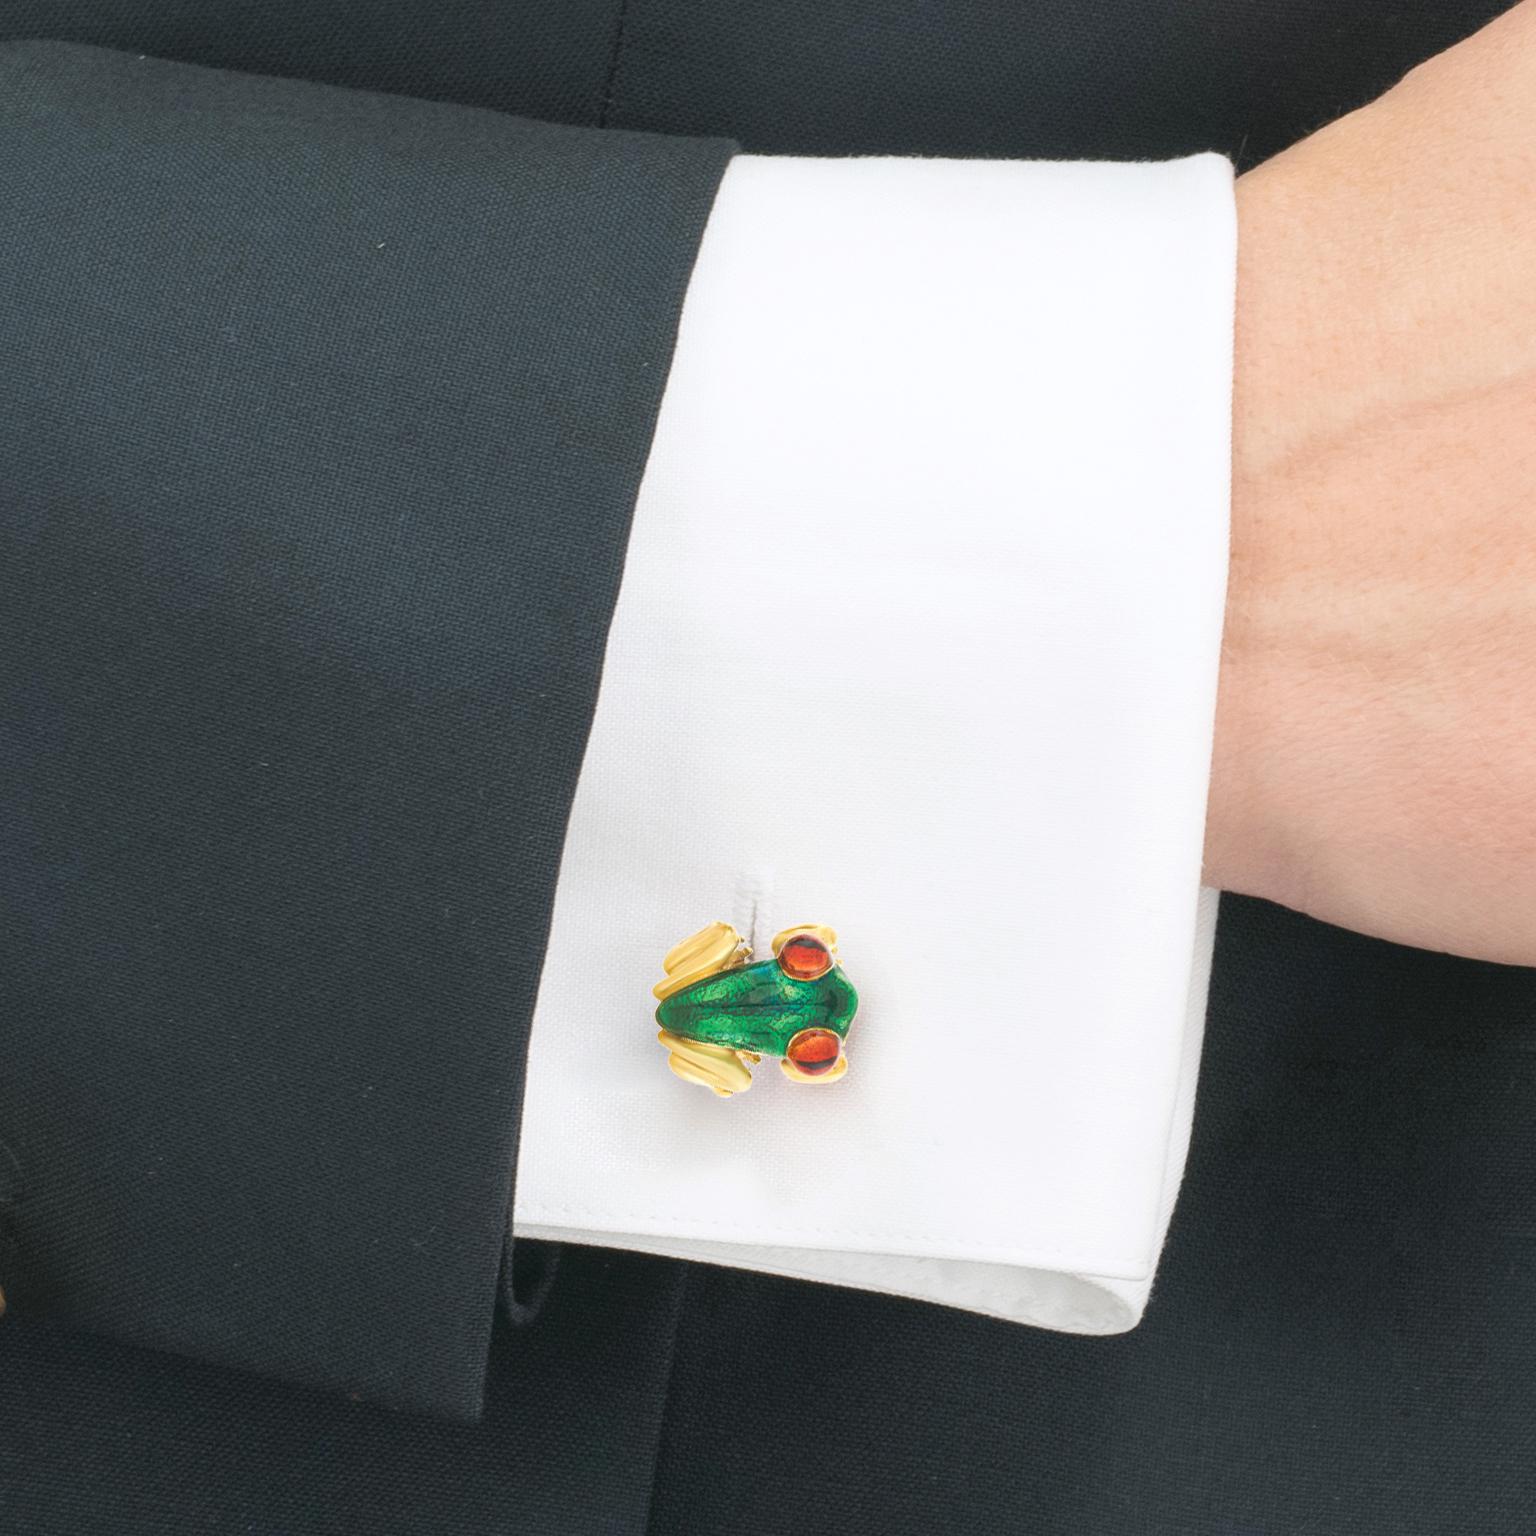 Circa 1990s, 18k, by Suzy Mor, American.  These whimsical Amazonian frogs cufflinks are beautifully detailed. Enameled in vivid green and red-amber, these well-made cufflinks are substantial in weight and in excellent condition. 

Remark: 